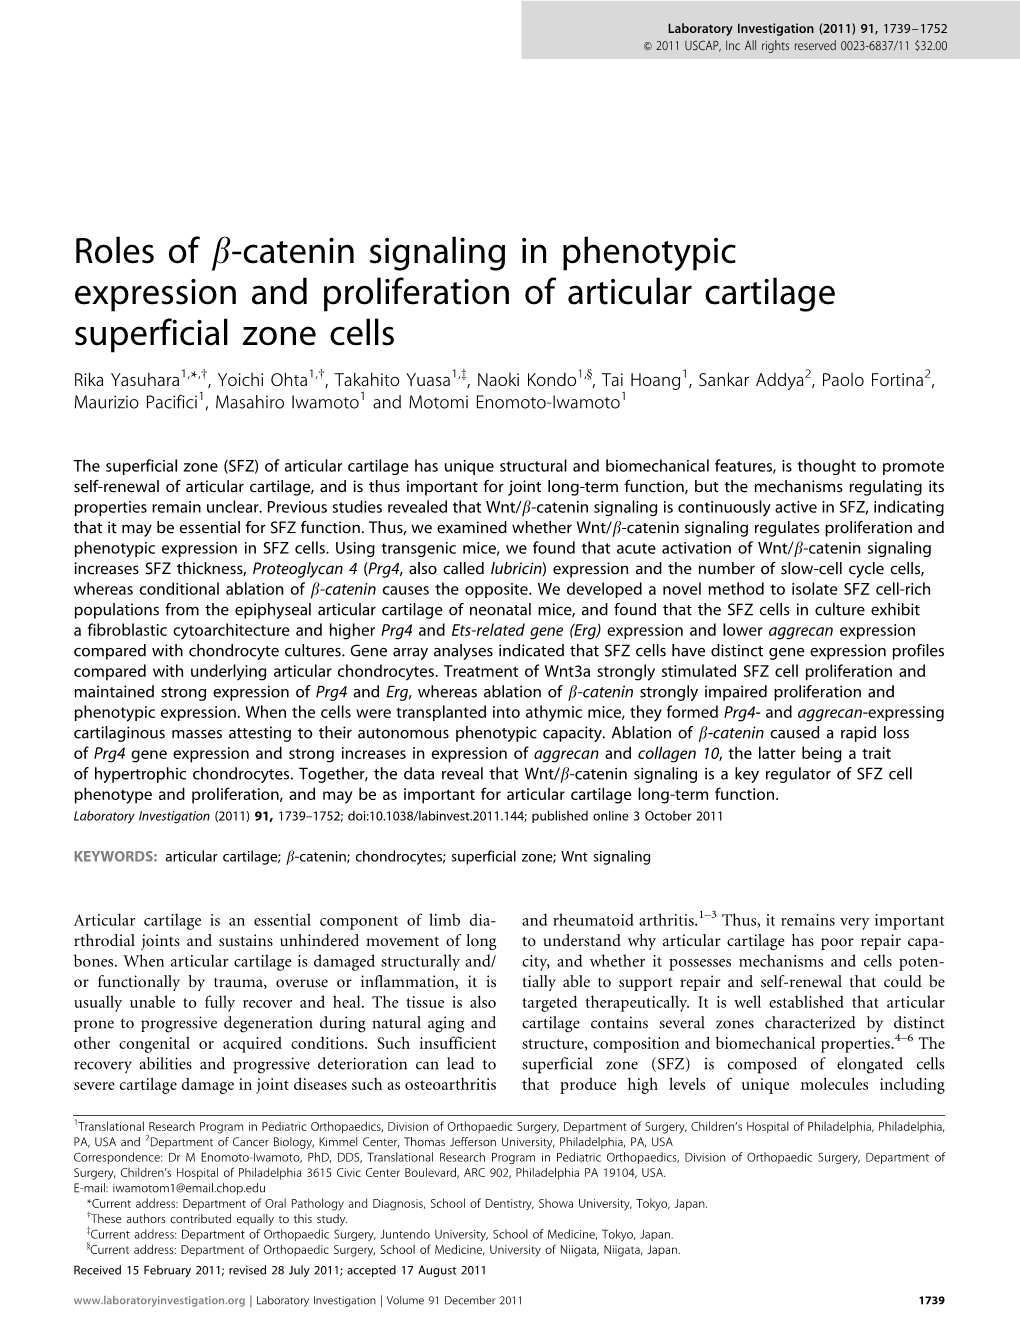 Roles of Β-Catenin Signaling in Phenotypic Expression And